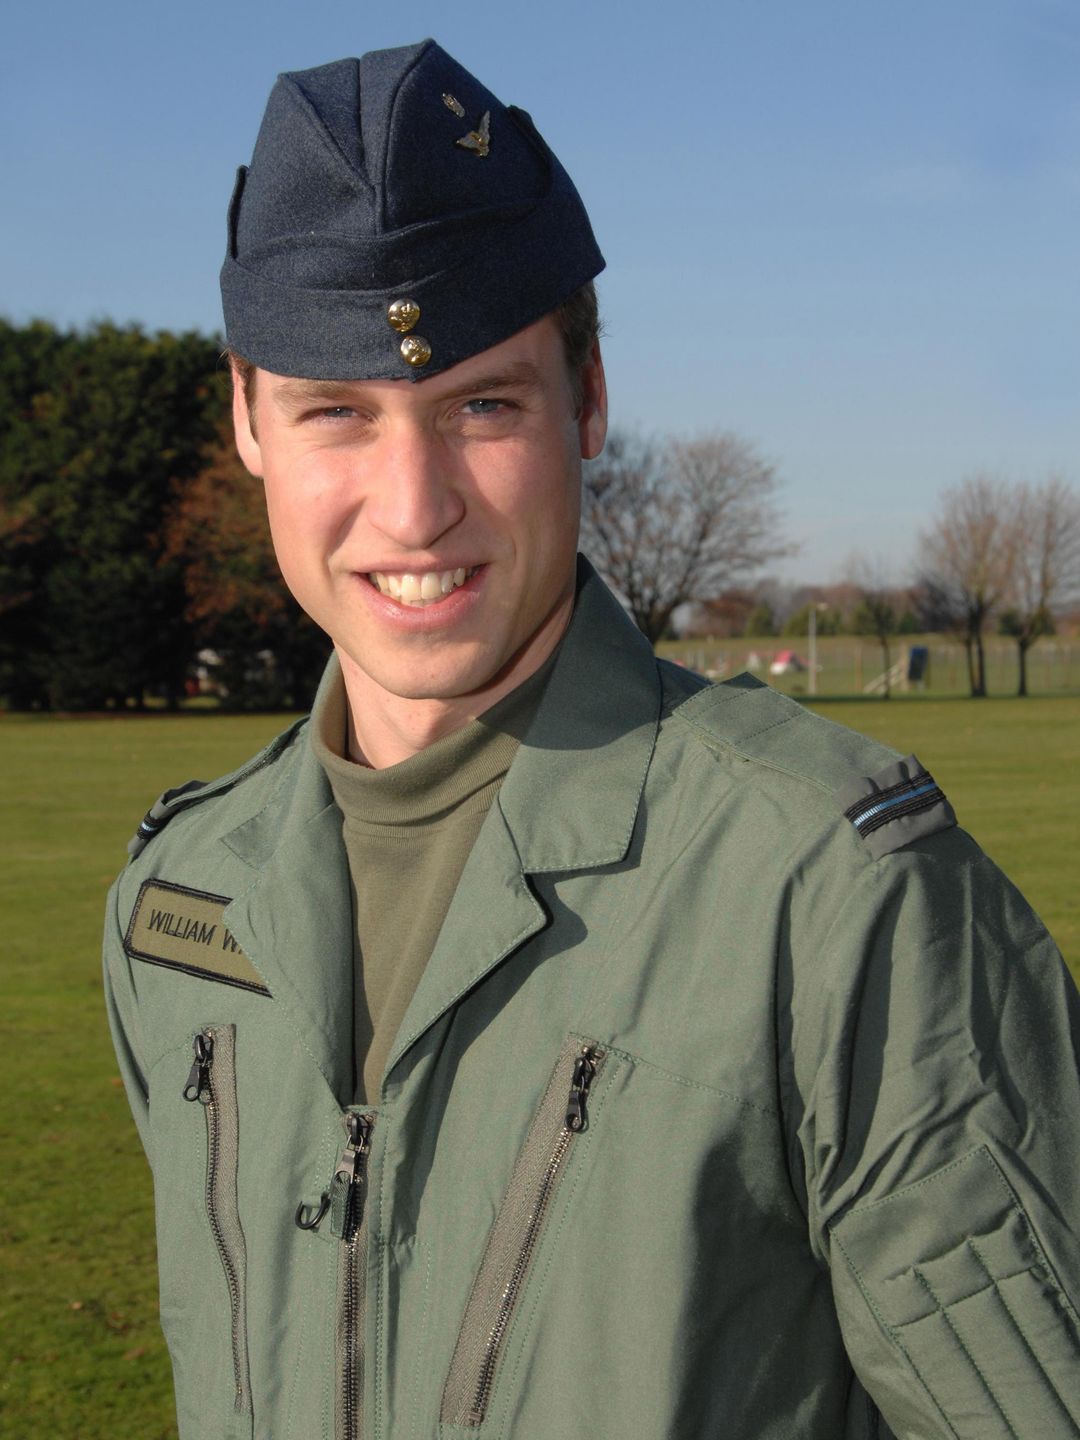 Prince William begins an intensive RAF course to learn how to fly on January 7, 2007 in Cranwell, England 